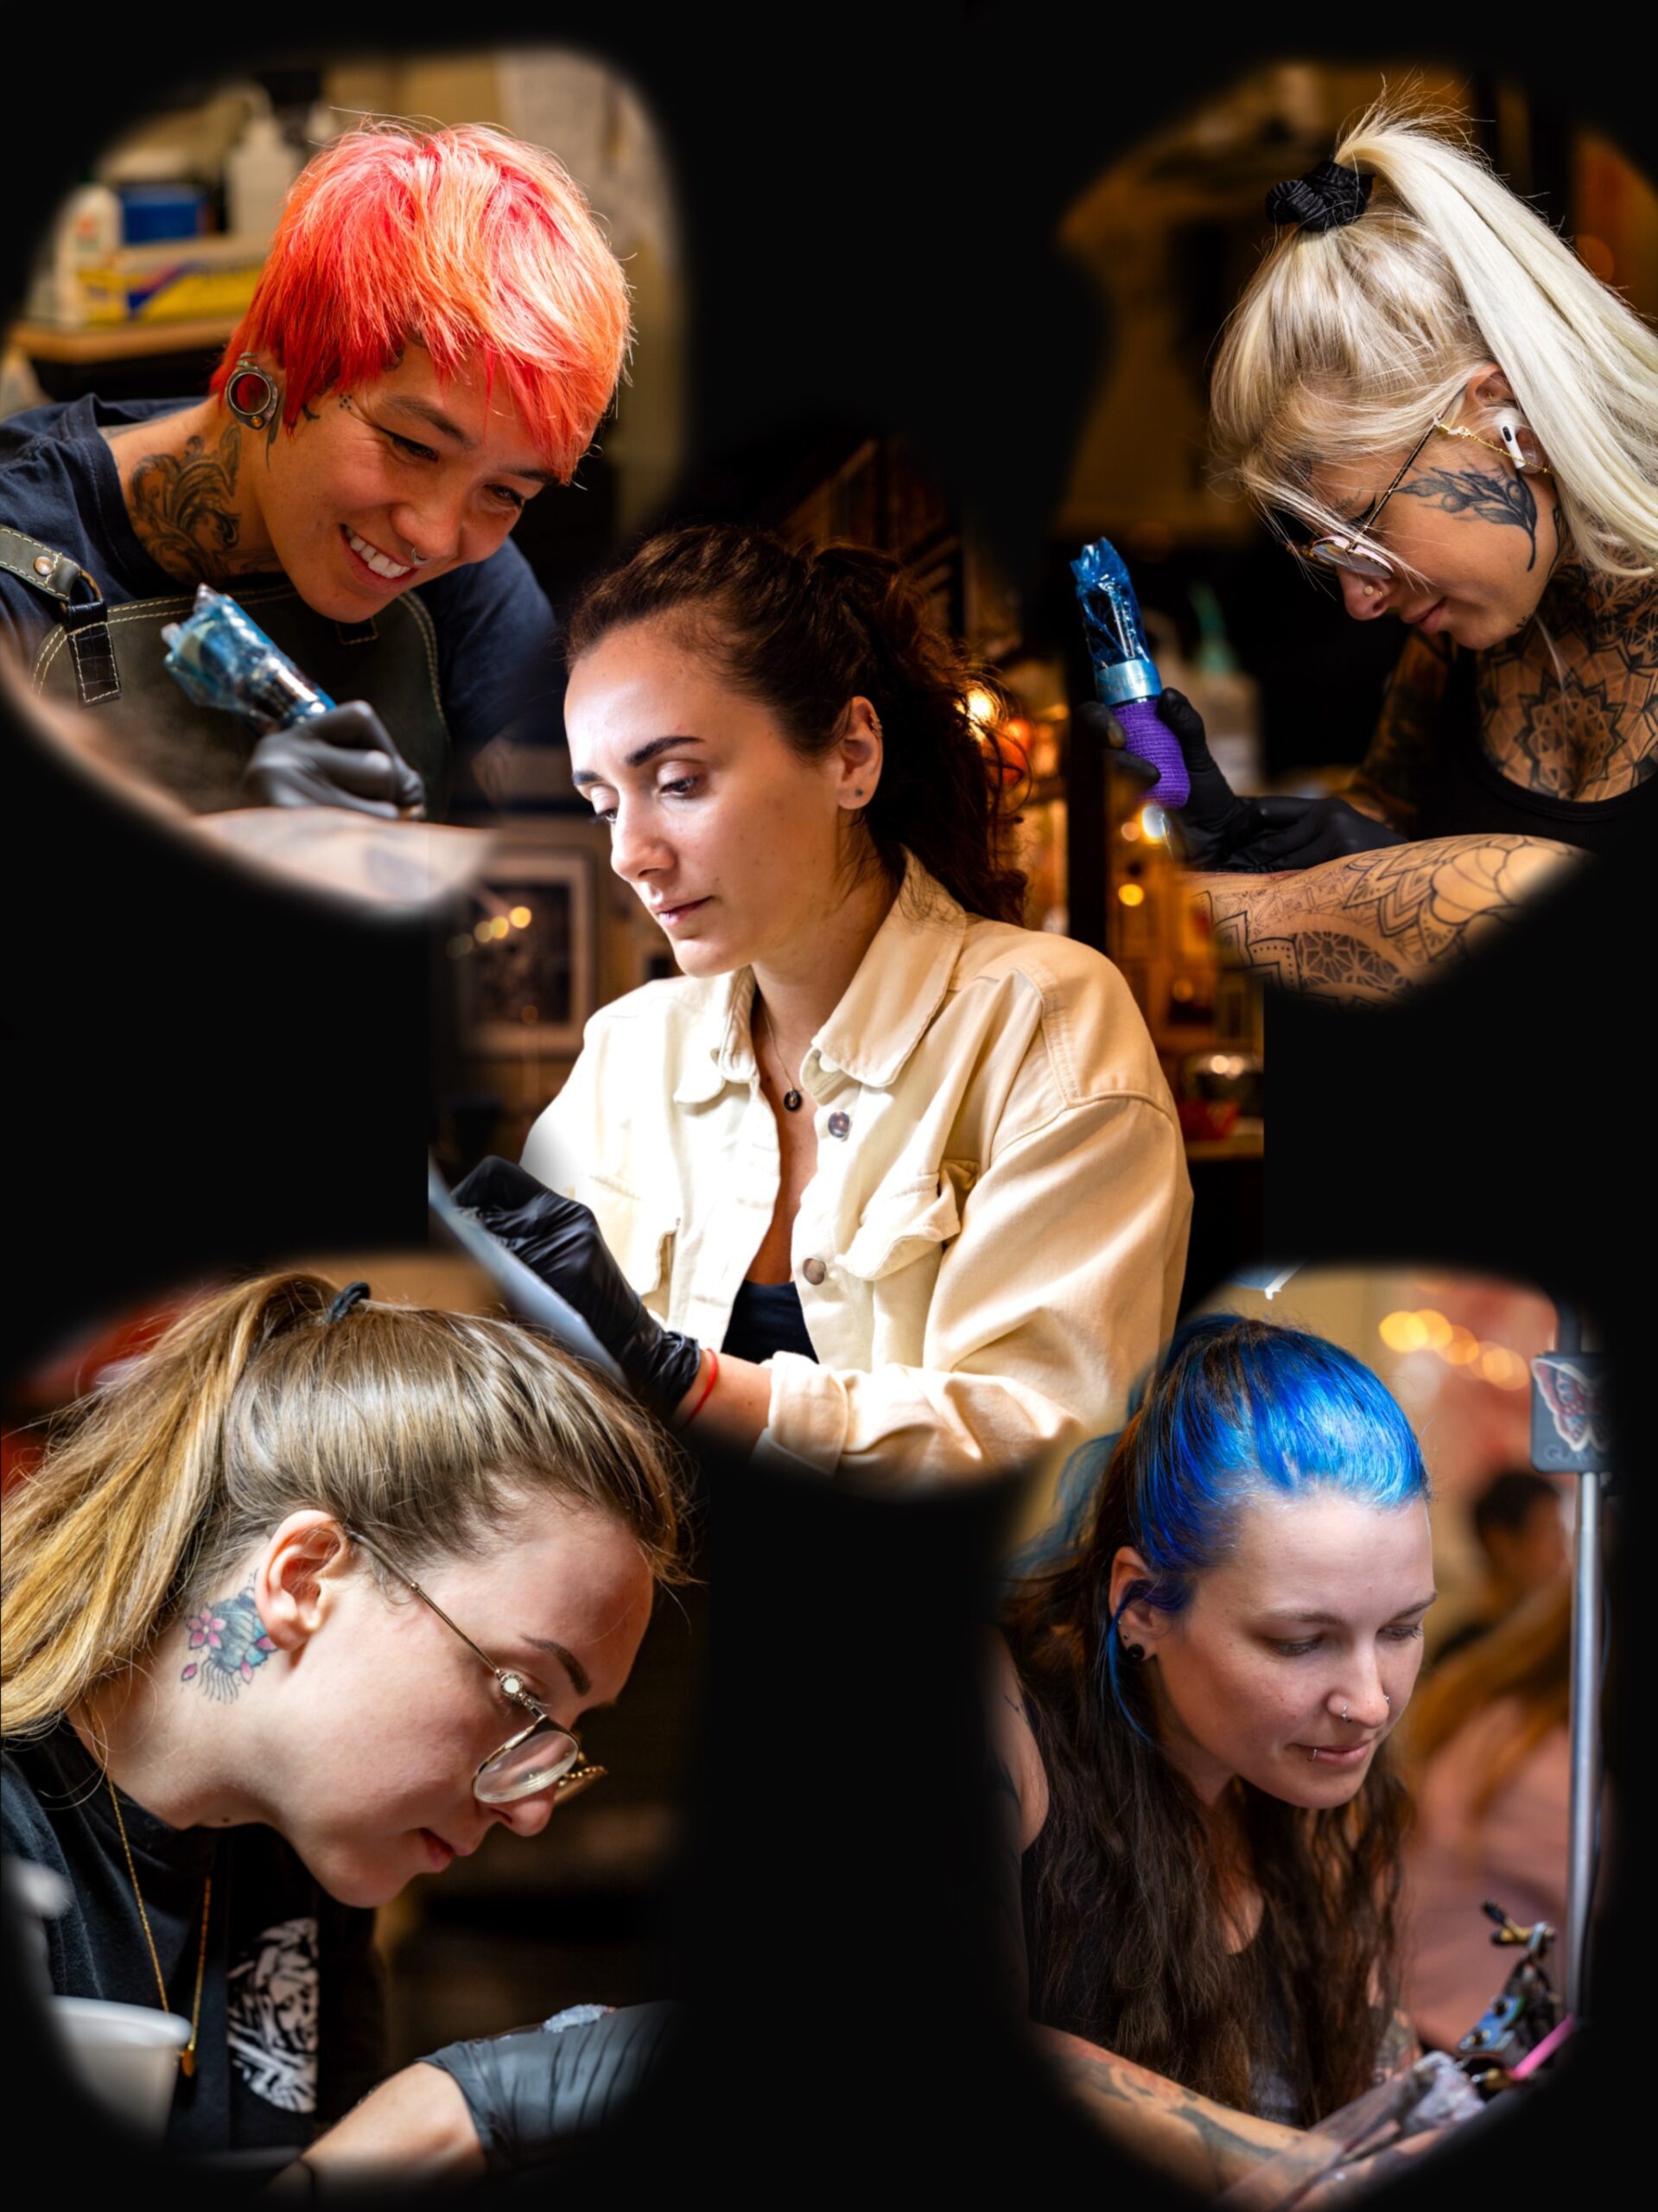 Female Tattoo Artists at Chapter One Tattoo